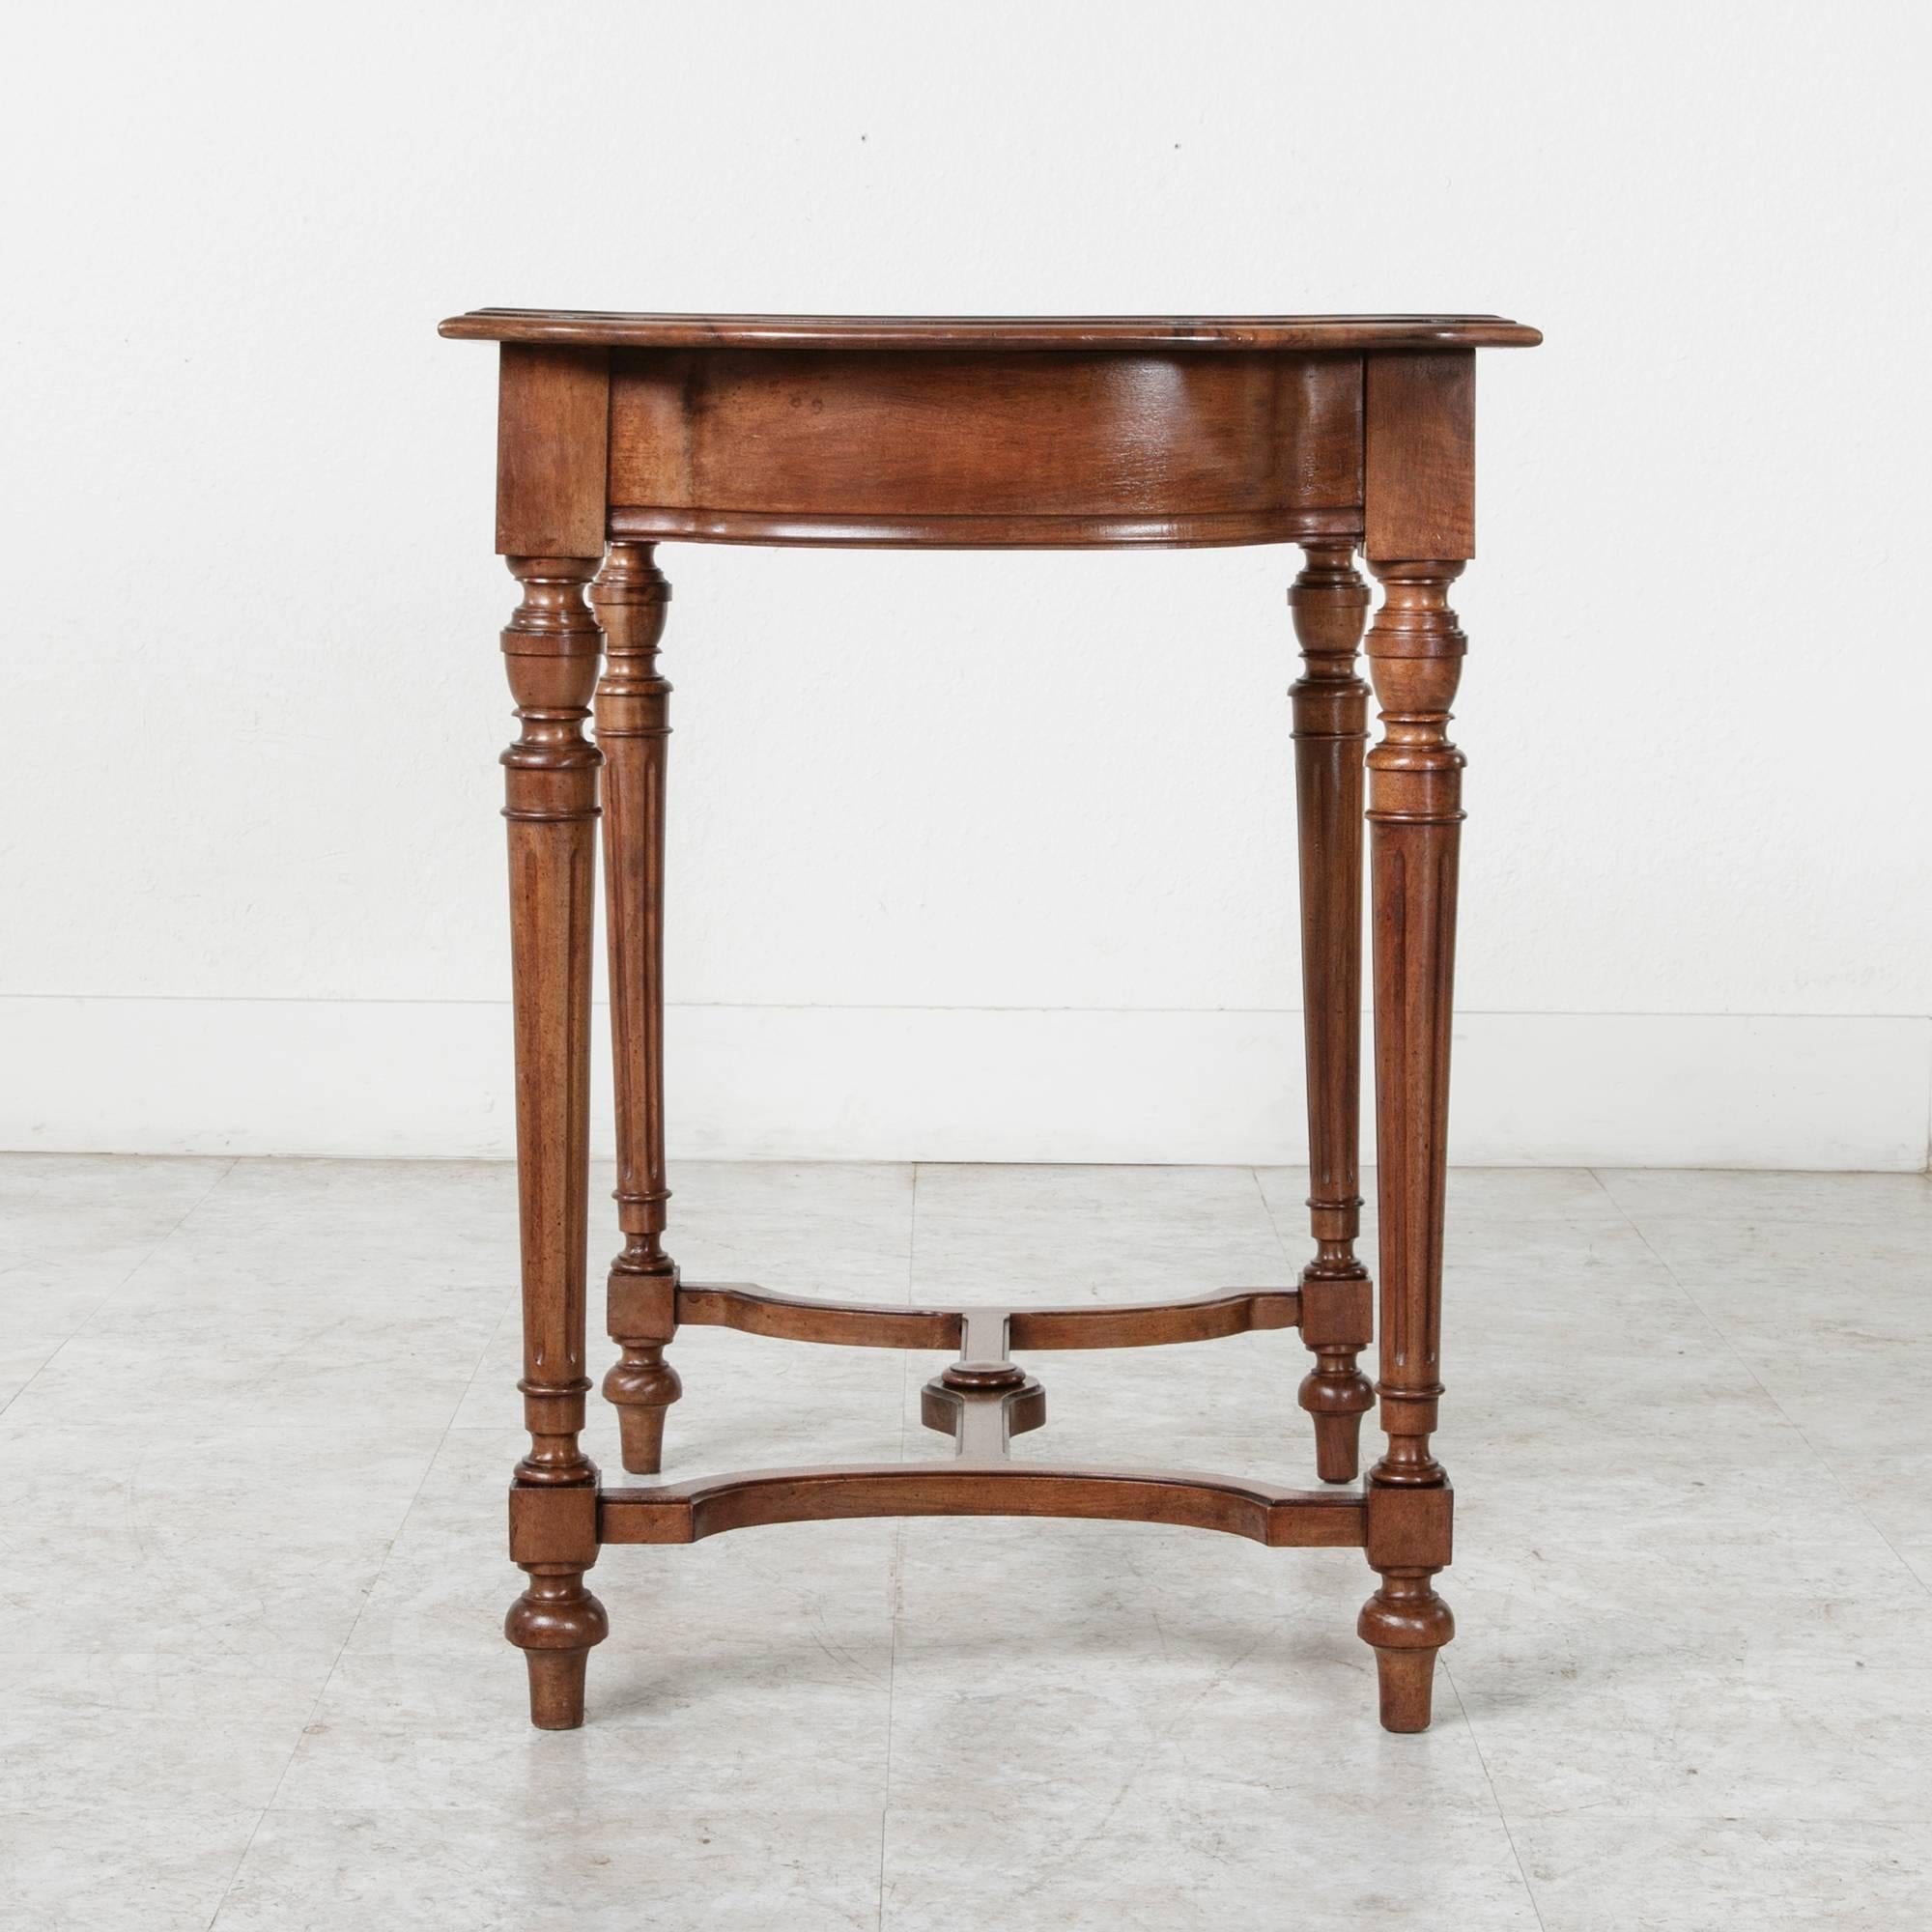 19th Century, French Solid Walnut Louis XVI Style Desk Side Table or Console 2